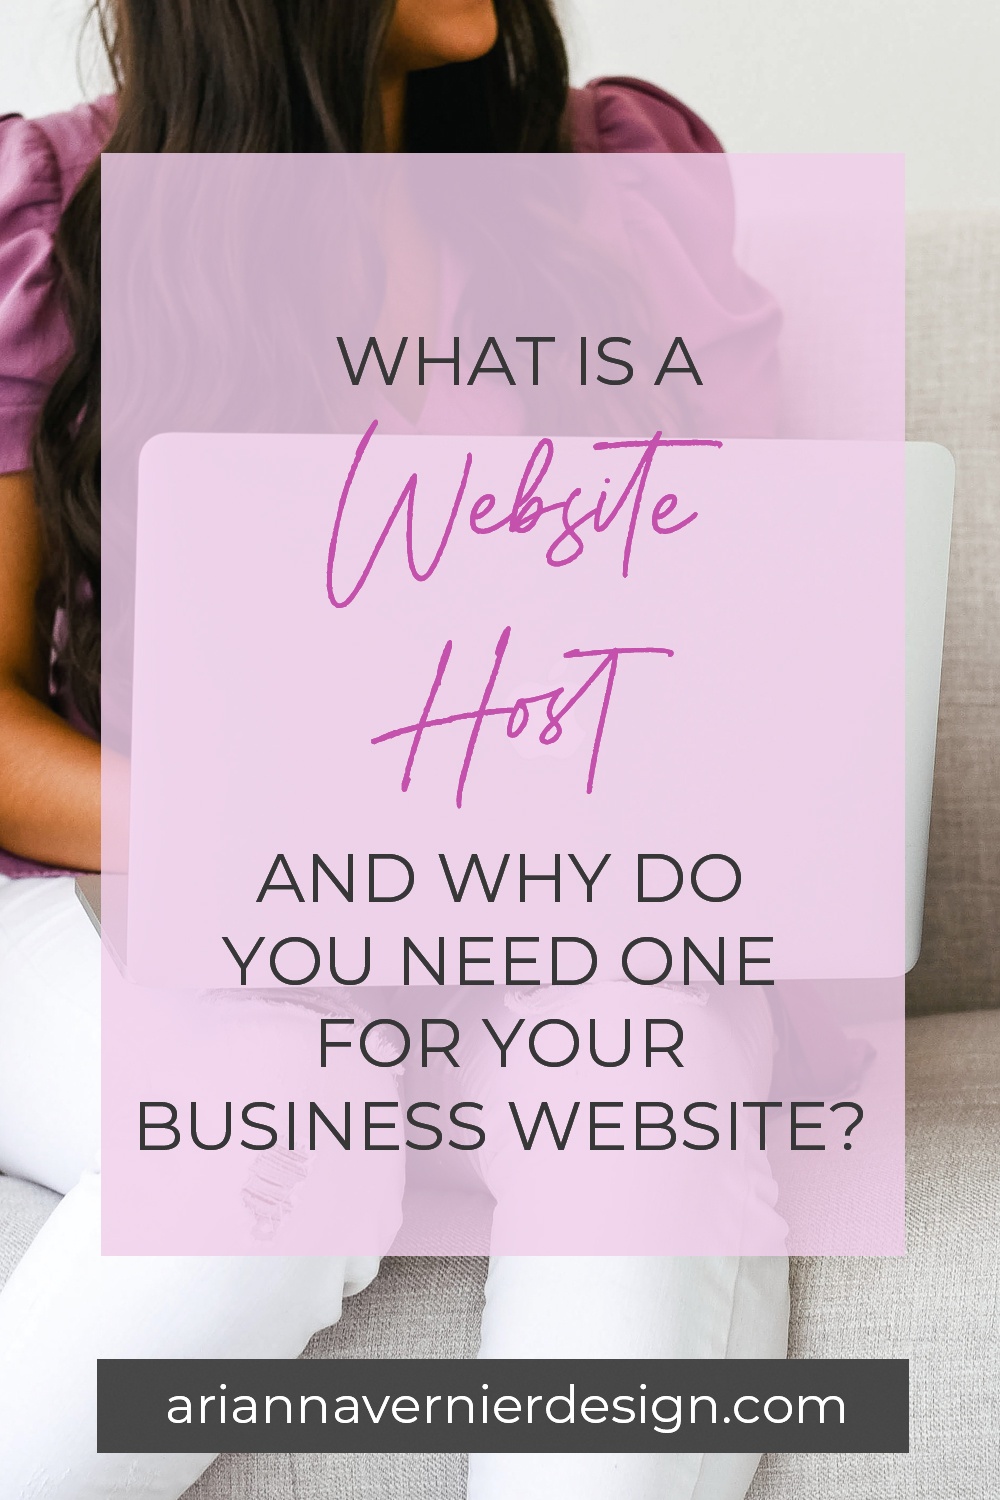 Pinterest pin with a woman on her laptop in the background, with a light purple rectangle over top, and the title "What is a Website Host and Why Do You Need One for Your Business Website?"